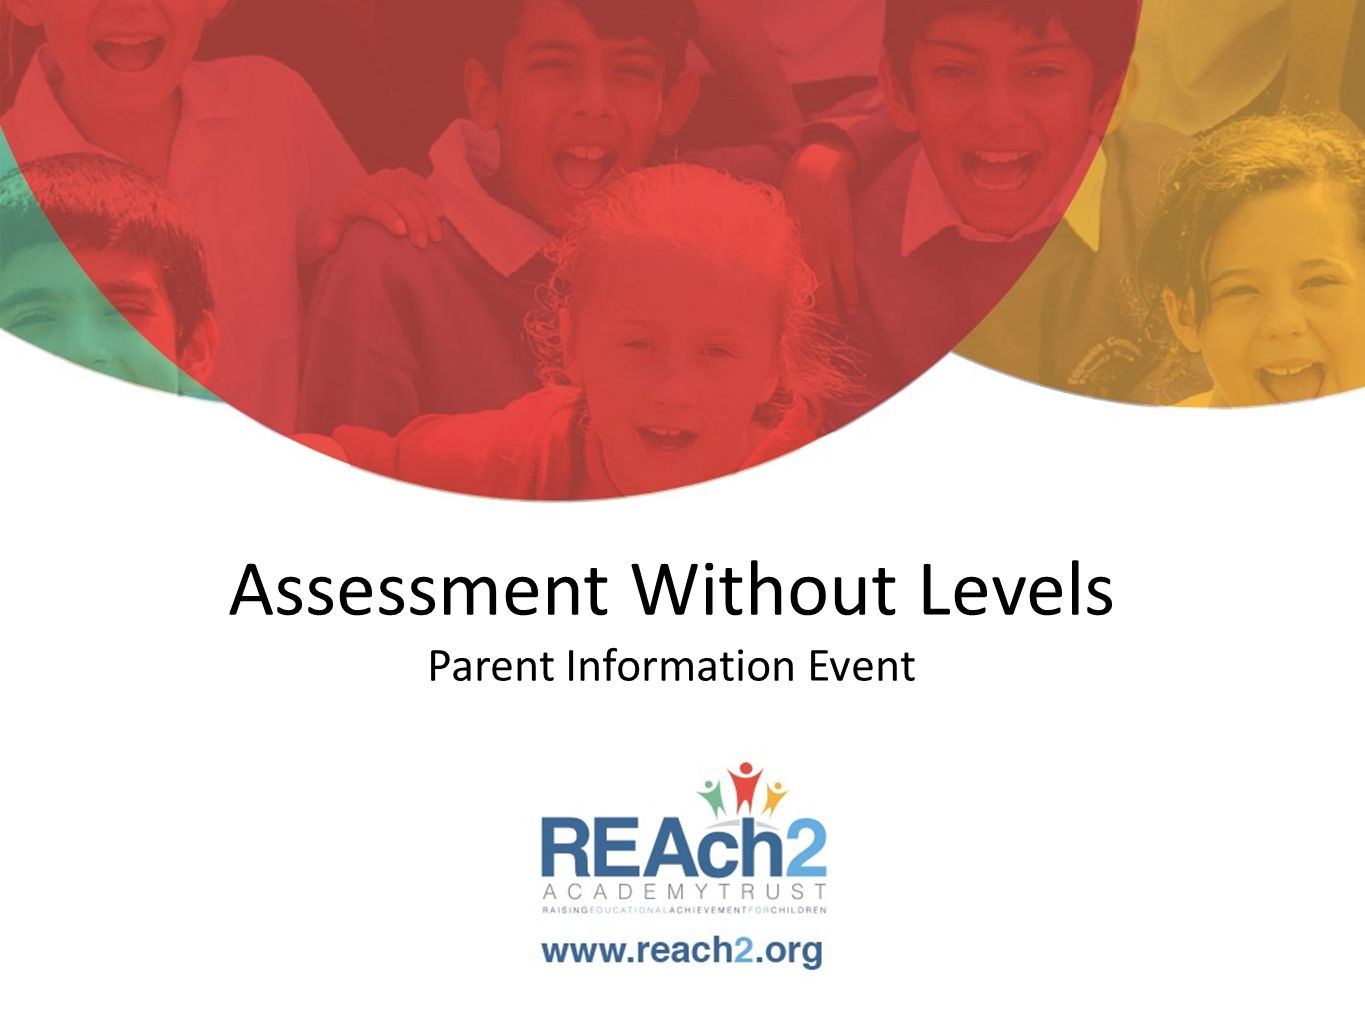 Assessment Without Levels Parent Information Event